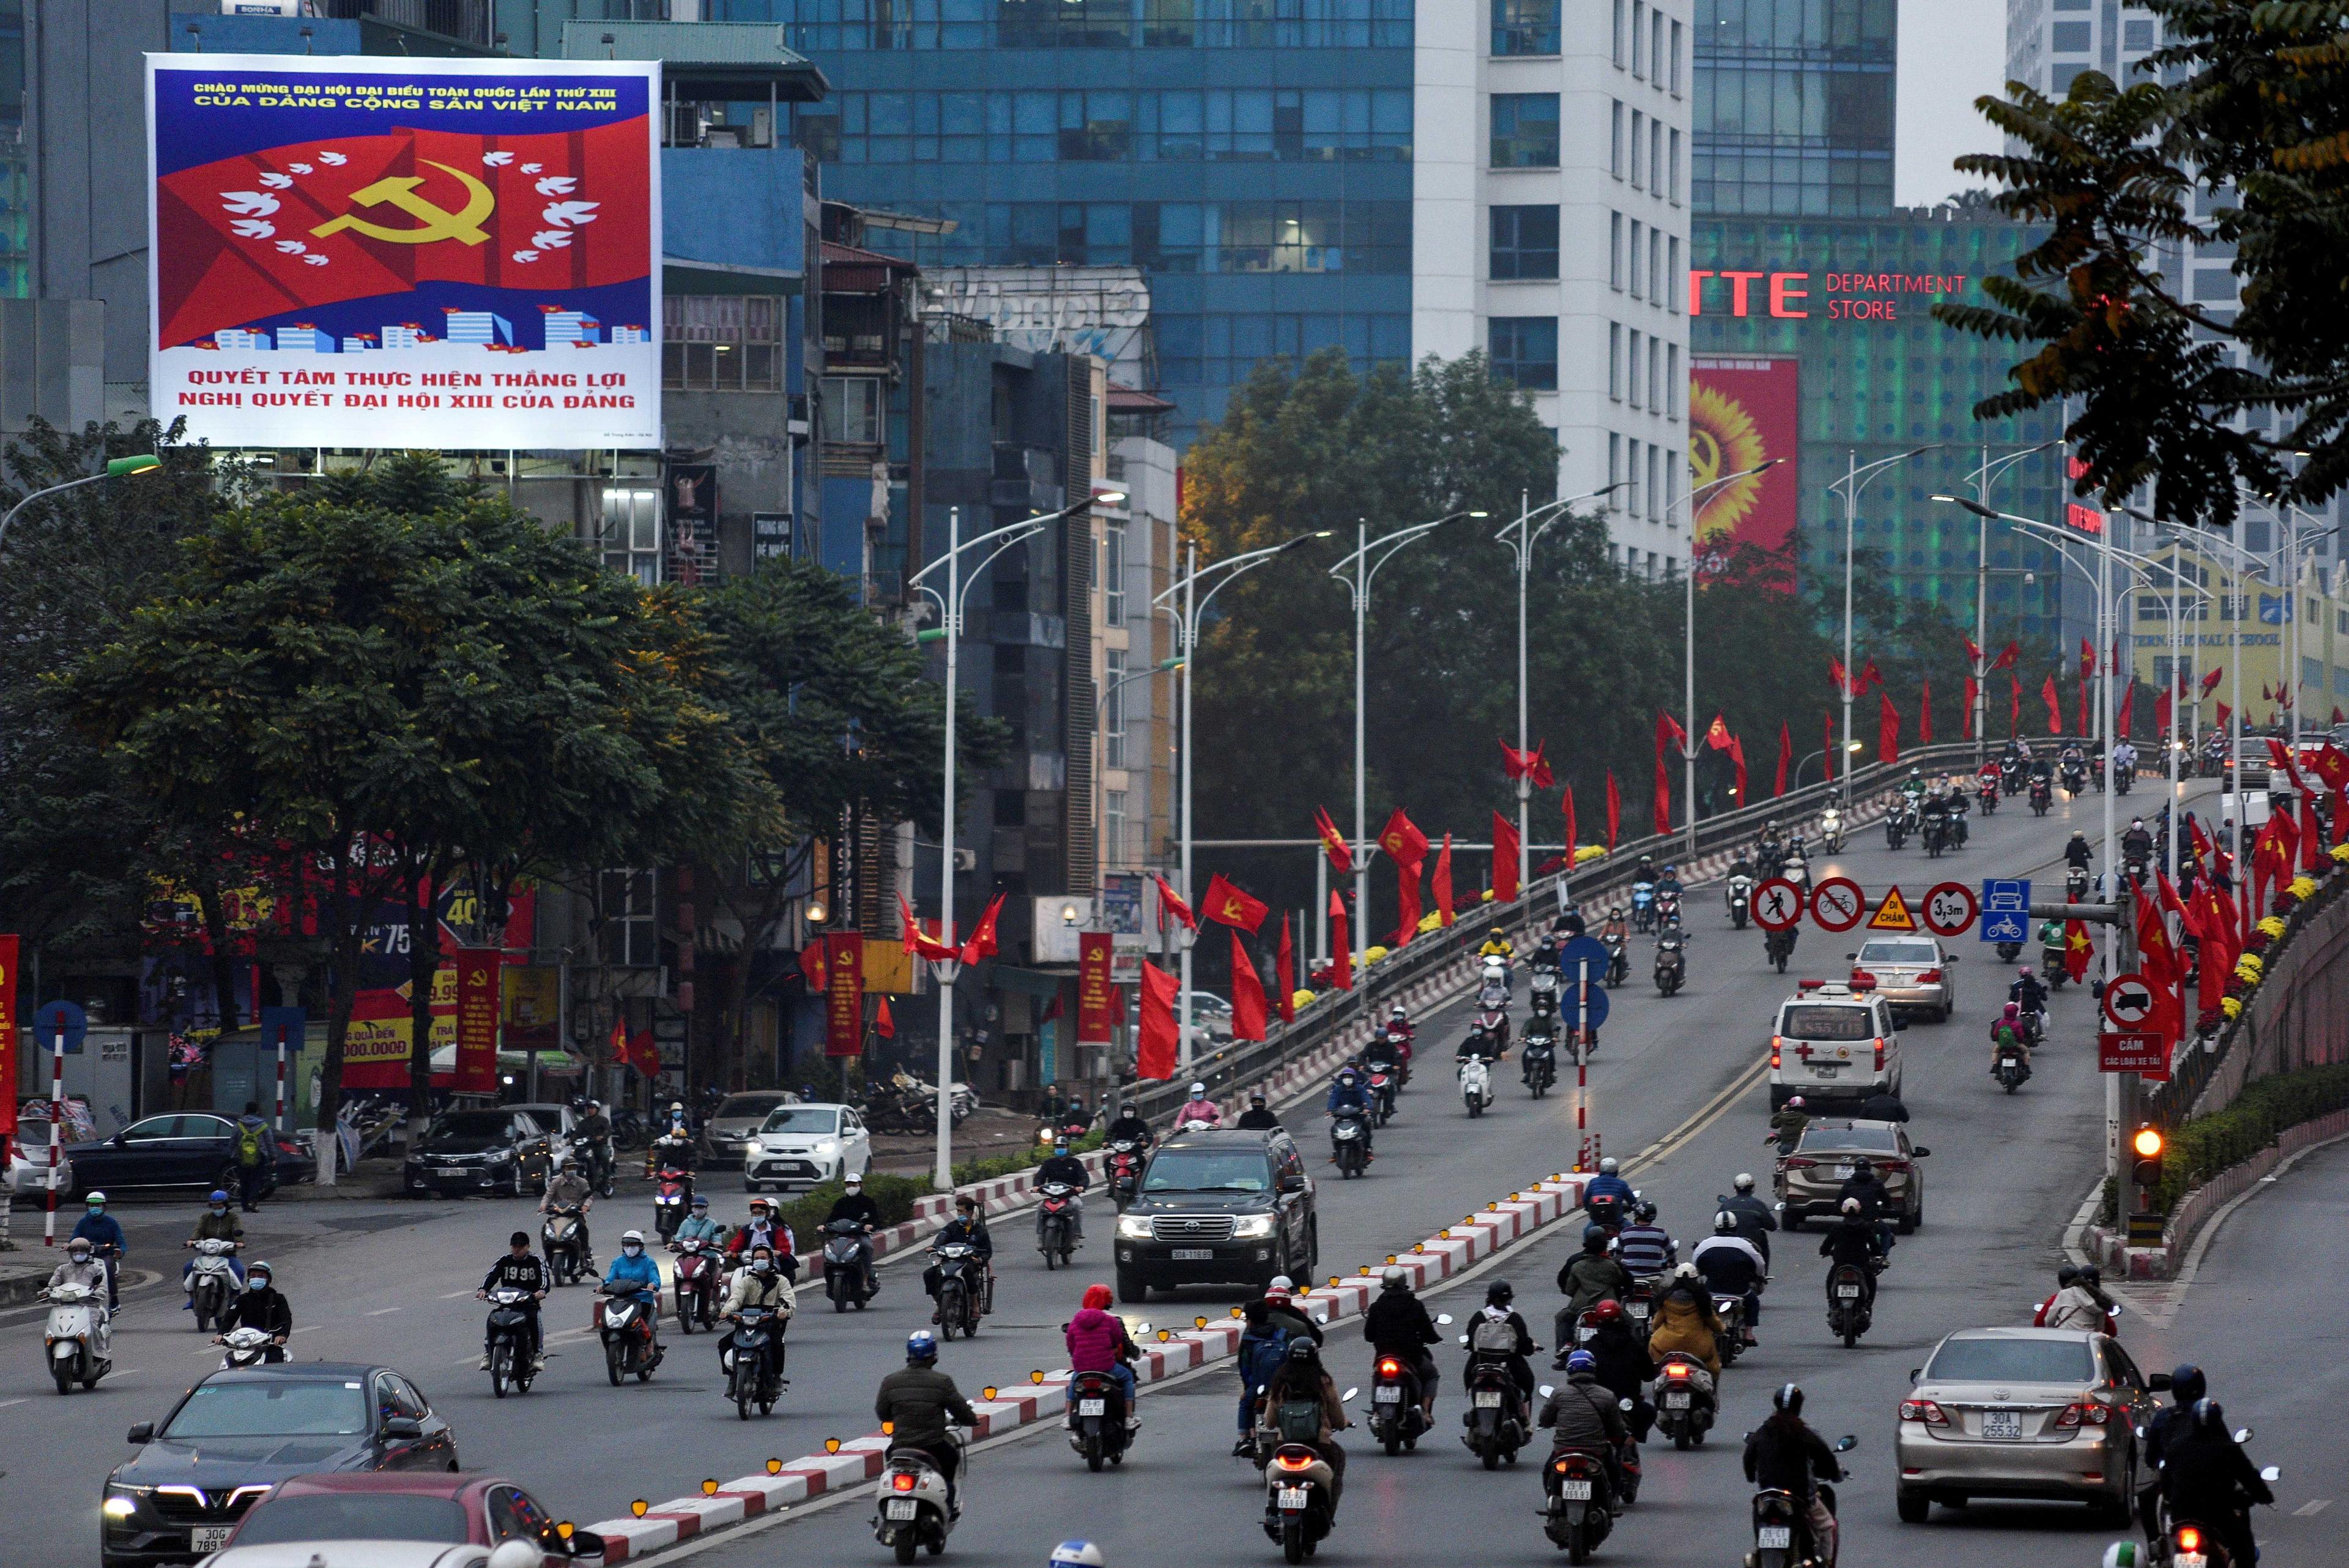 Cars and motorbikes ride in a decorated avenue in Hanoi, Vietnam, Jan 25, 2021. Photo: Reuters